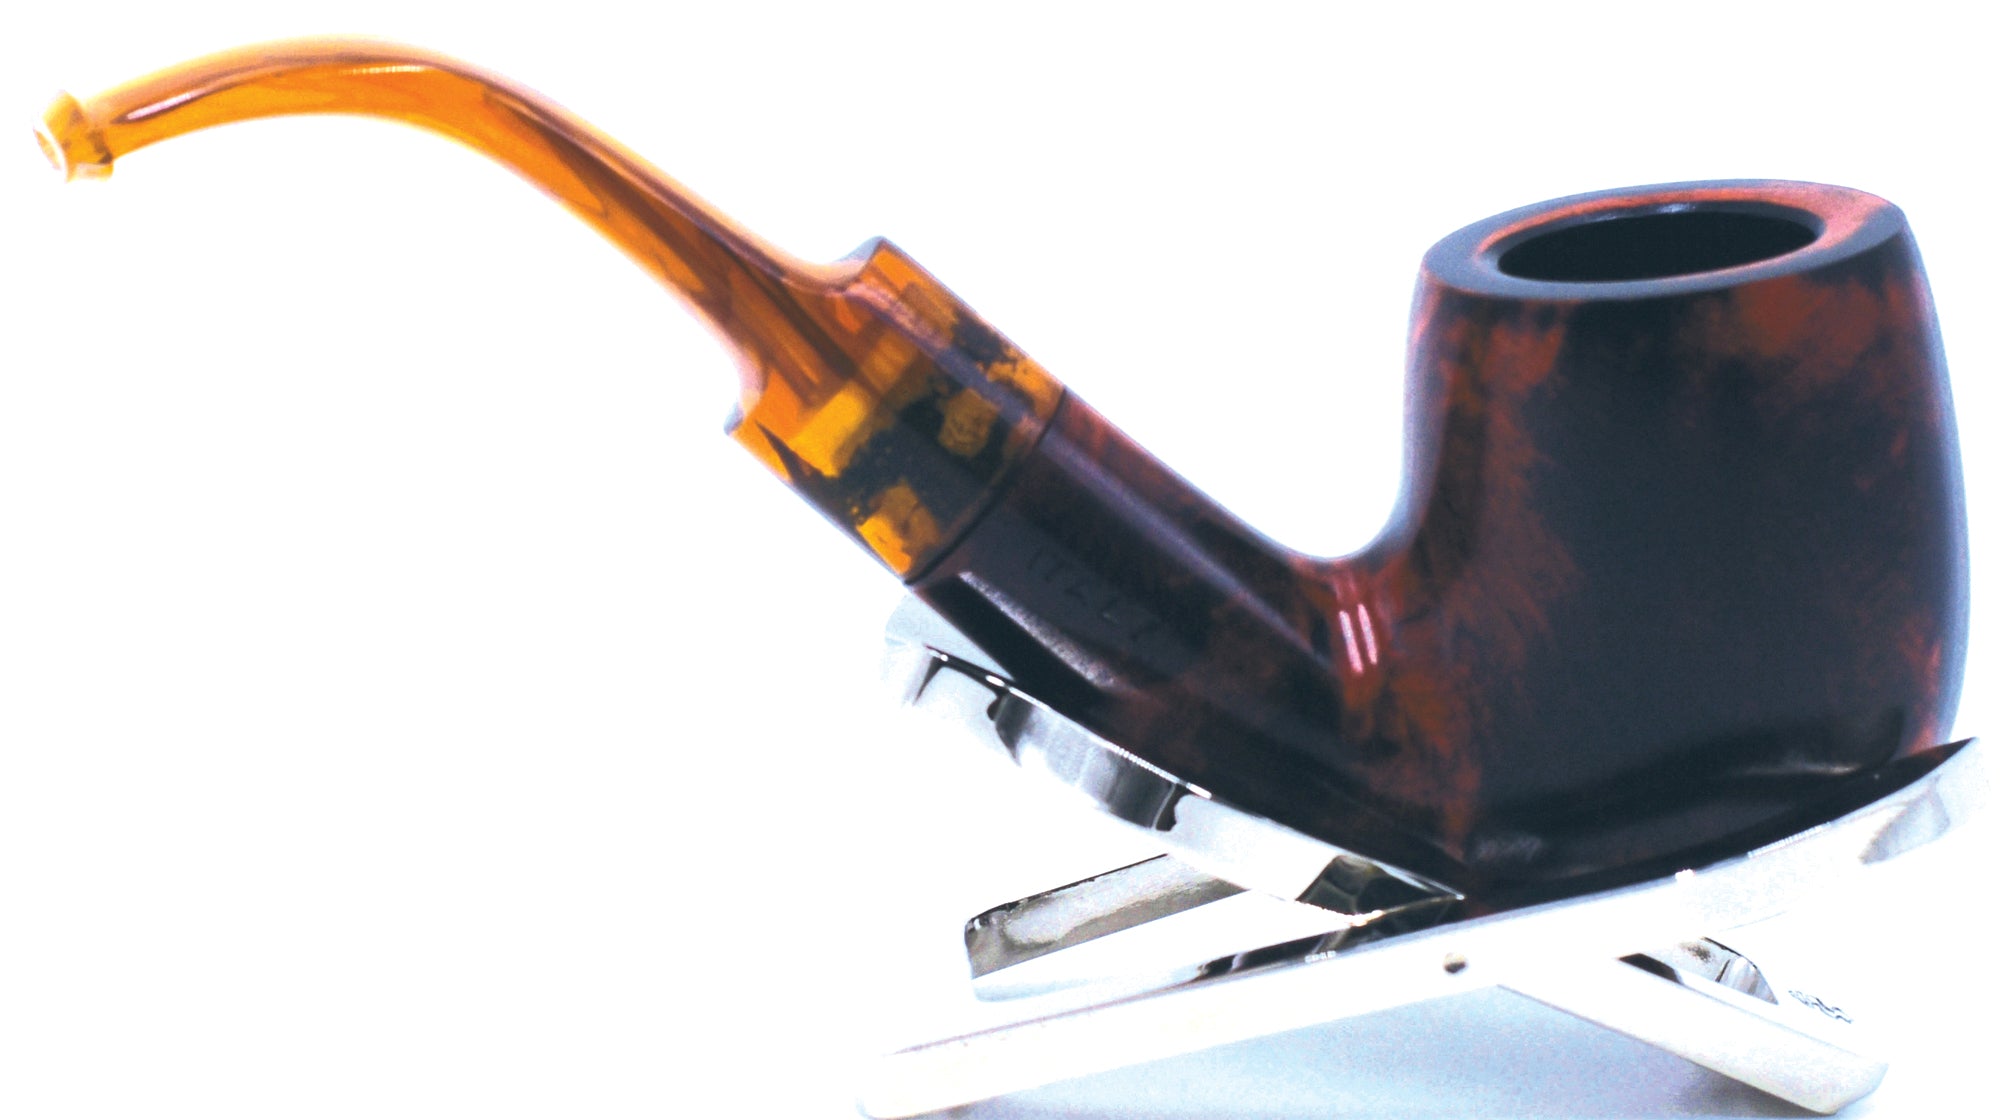 LEGENDEX® LASCALA* Plexiglass Mouthpiece 9 MM Filtered Briar Smoking Pipe Made In Italy 01-08-704